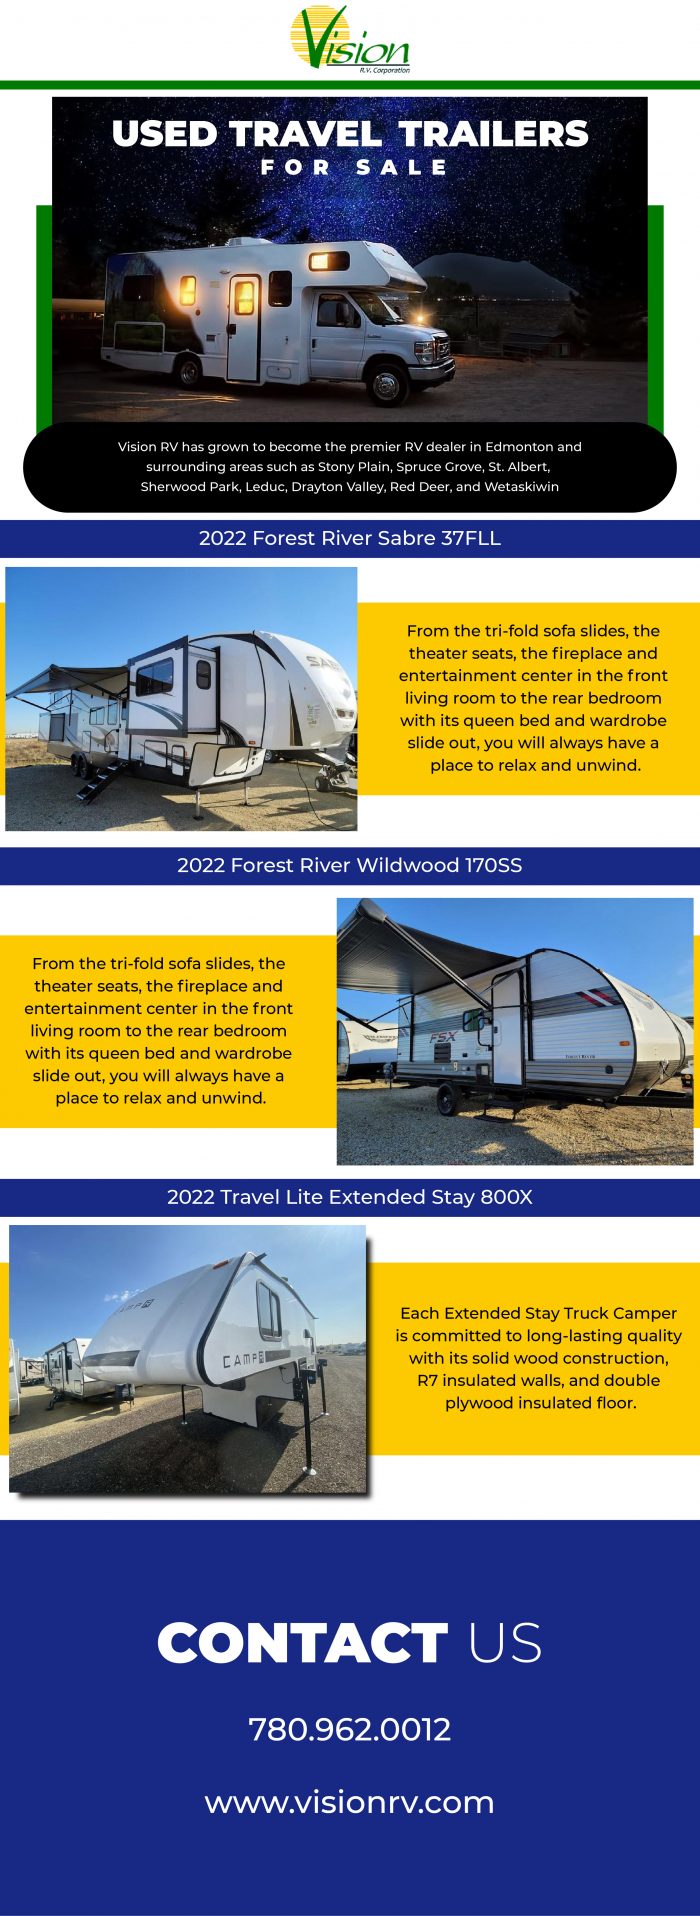 Used Travel Trailers for Sale – Vision RV